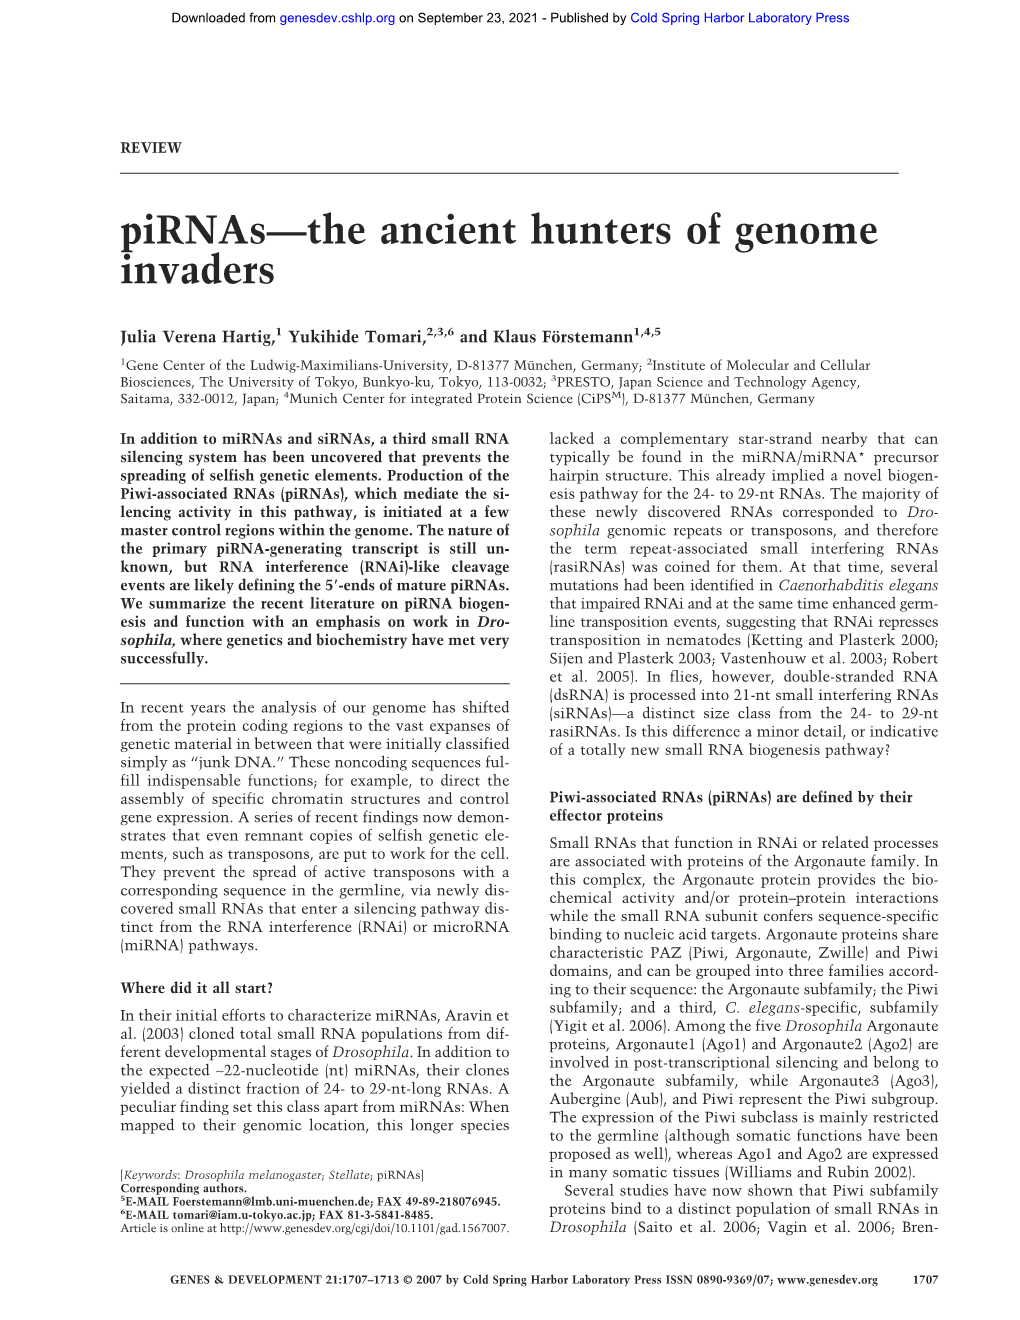 Pirnas—The Ancient Hunters of Genome Invaders